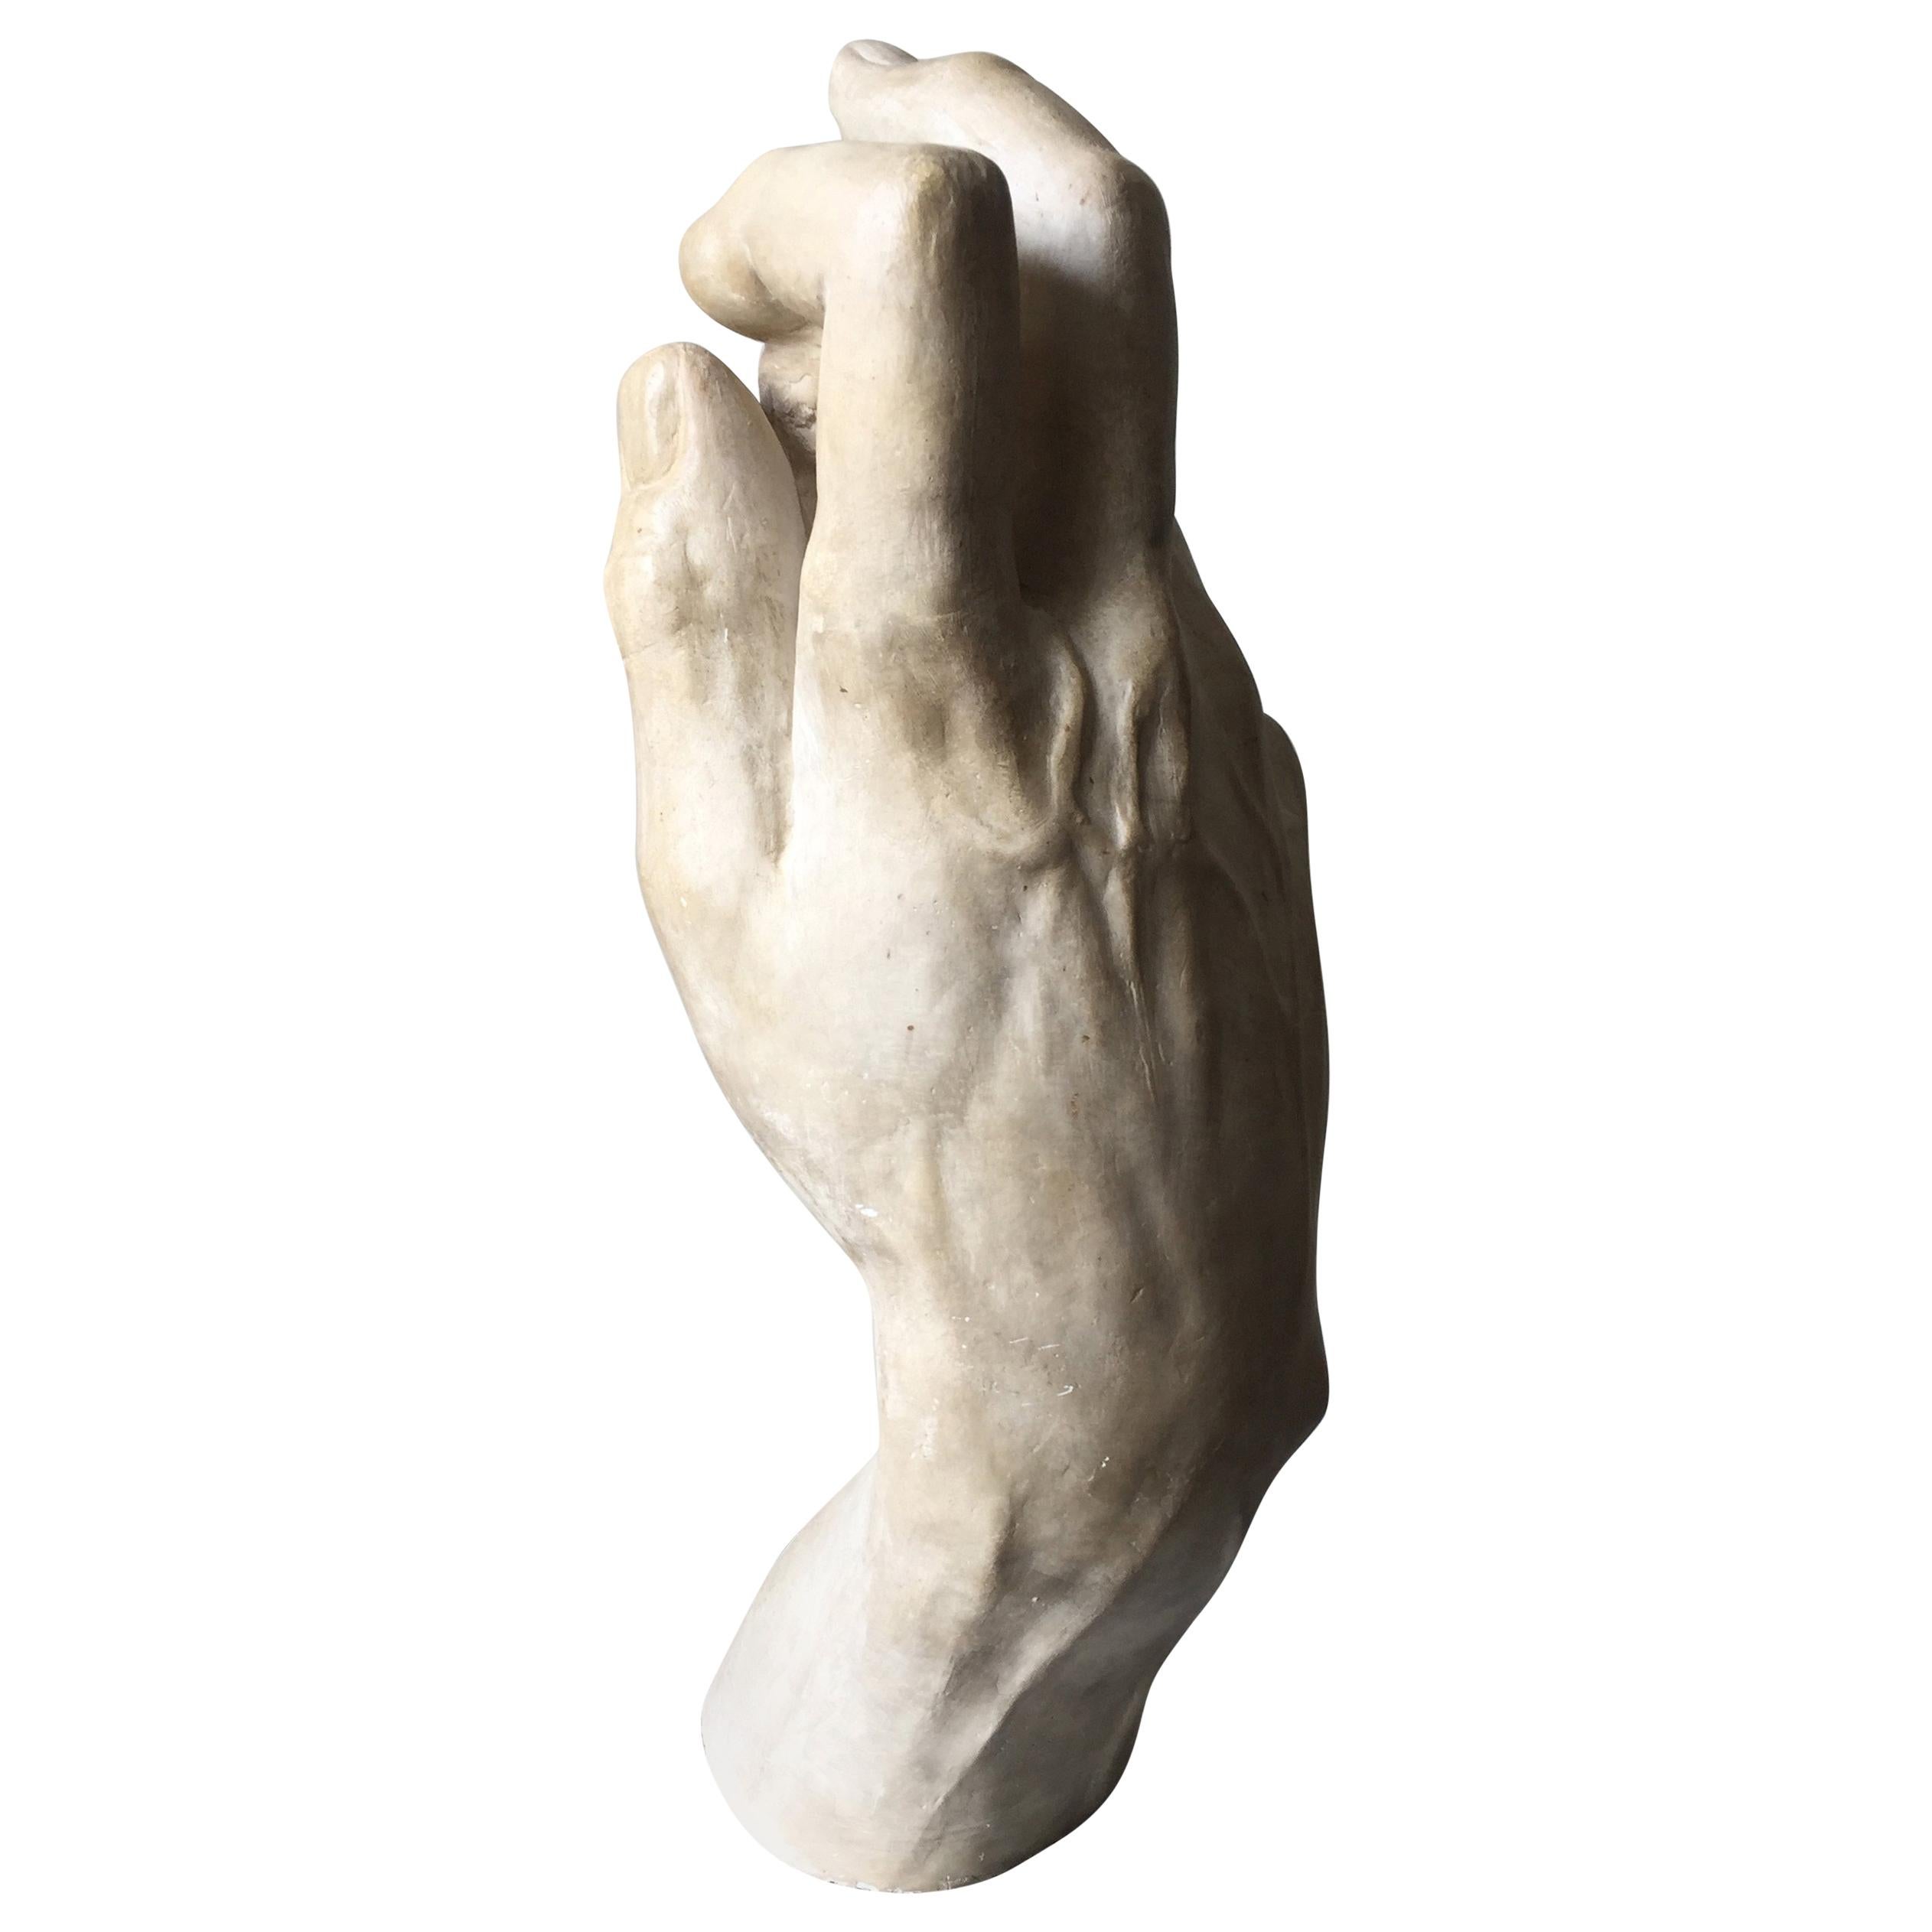 1:1 Scale Plaster Right Hand of Michelangelo's David